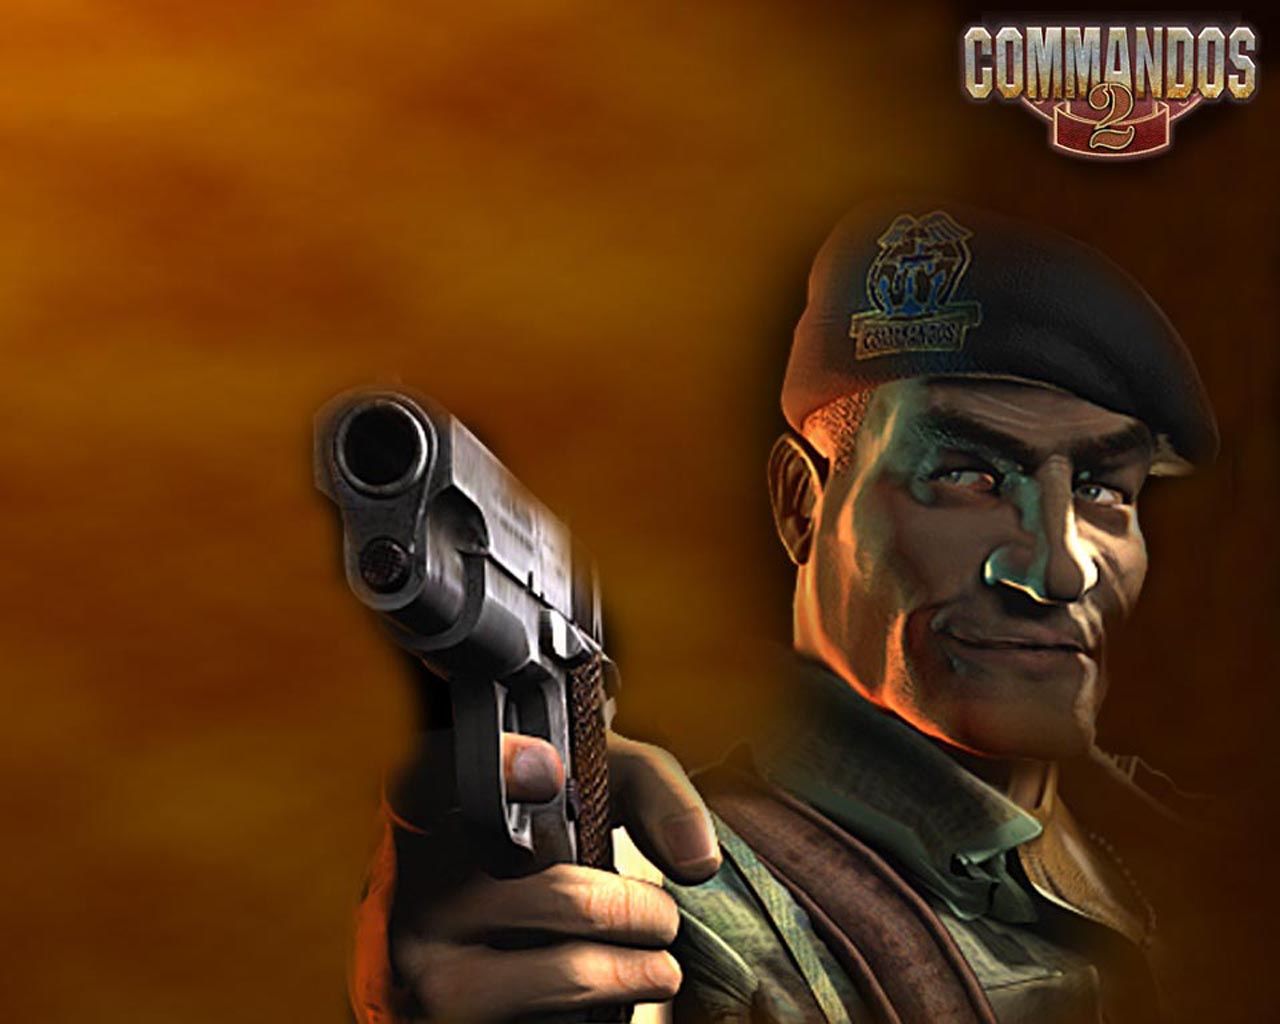 Picture Commandos vdeo game Games